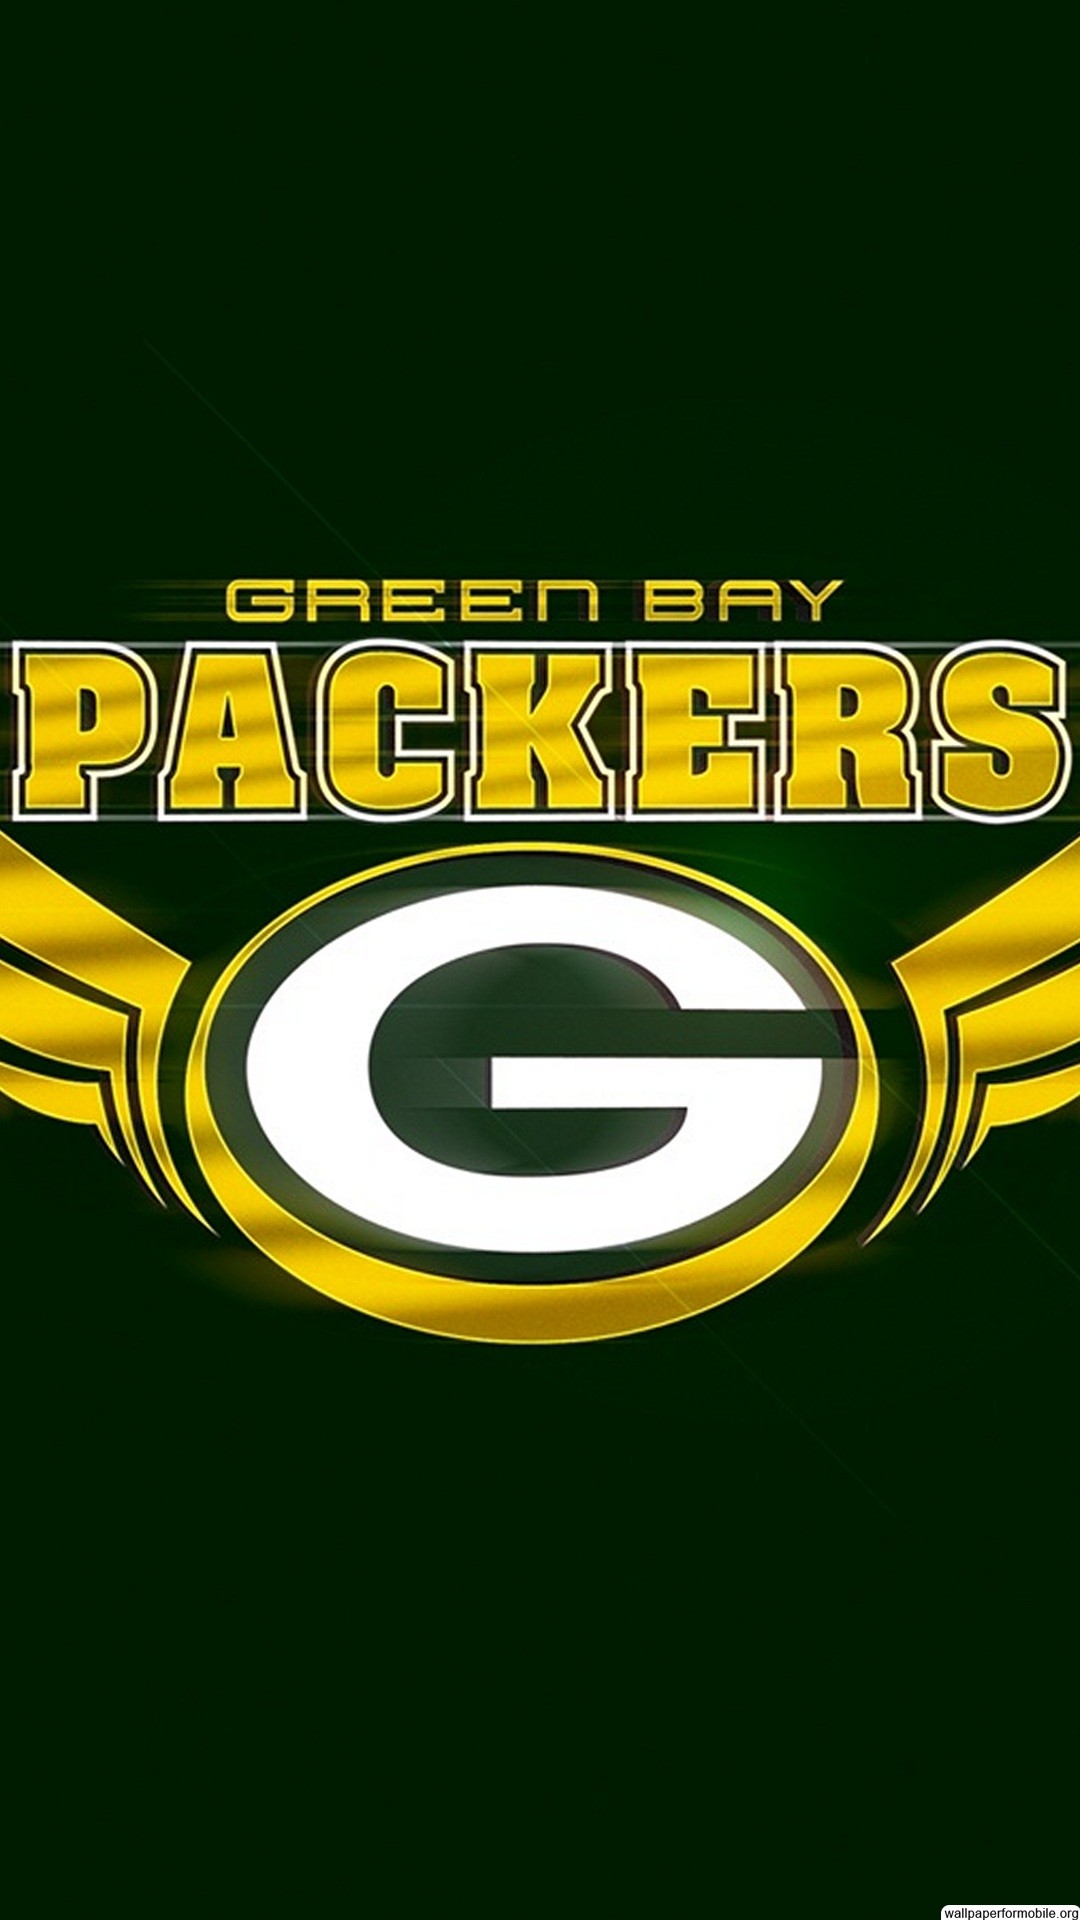 1080x1920 Wallpaper Of Green Bay Packers